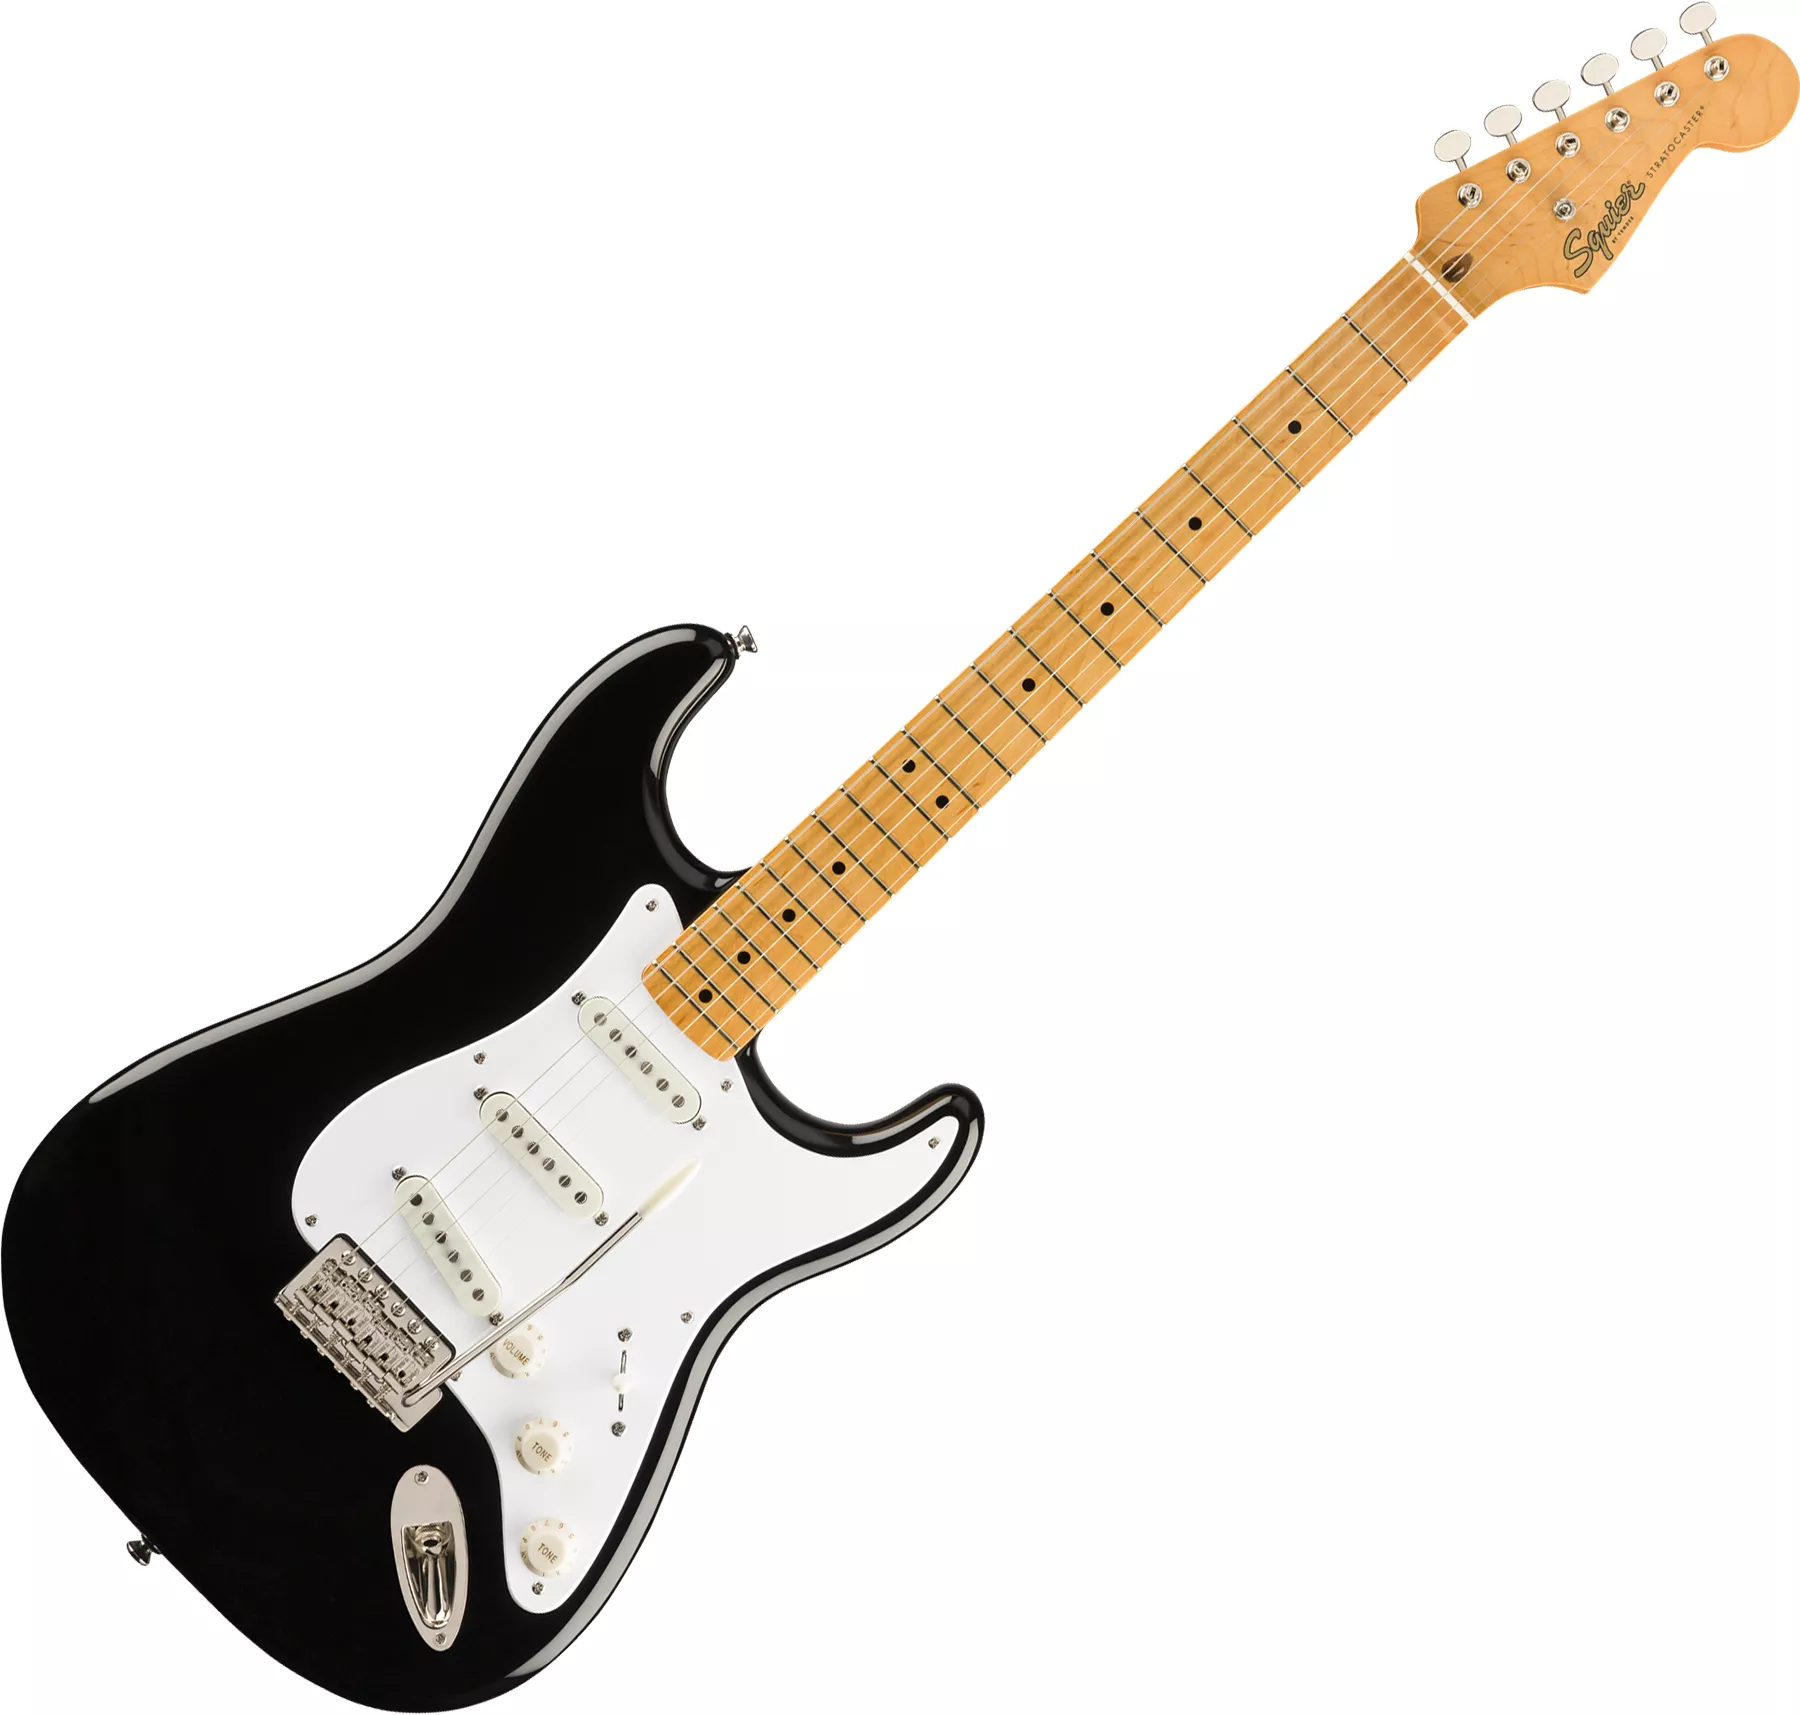 Squier Classic Vibe '50s Stratocaster - black Str shape electric